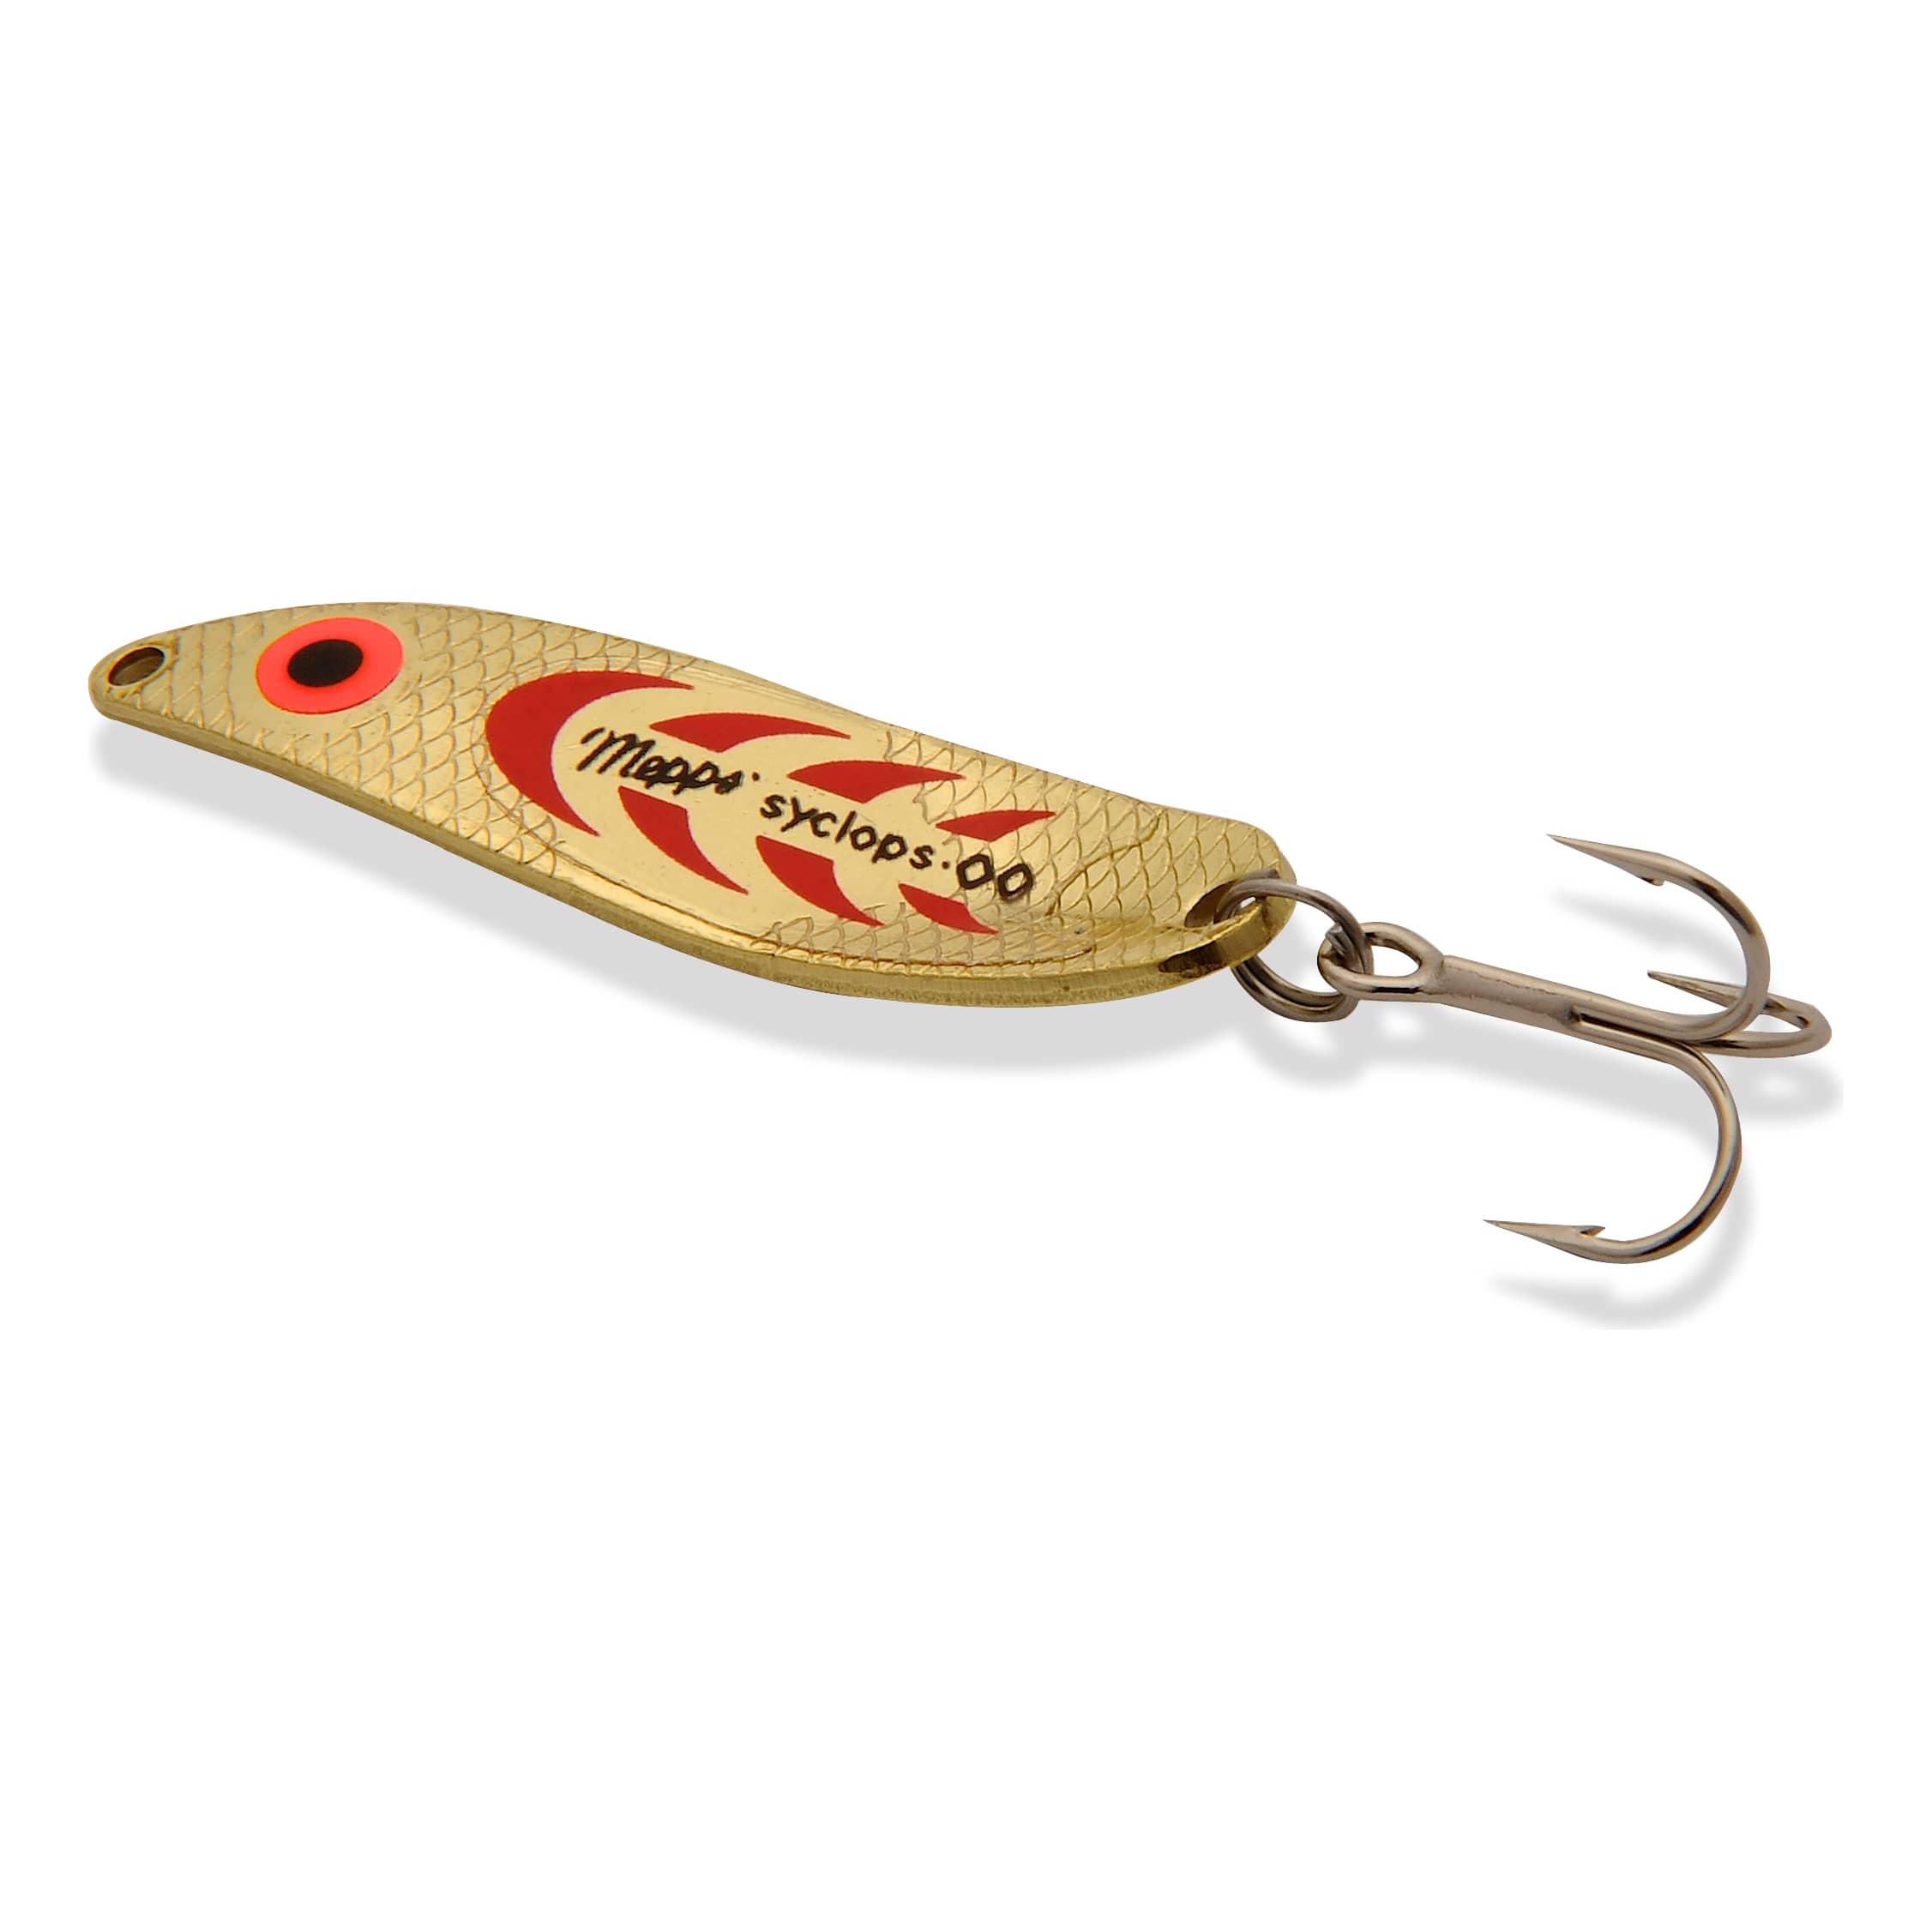 All Species Saltwater Fishing Spoon-Trolling Fishing Baits, Lures for sale